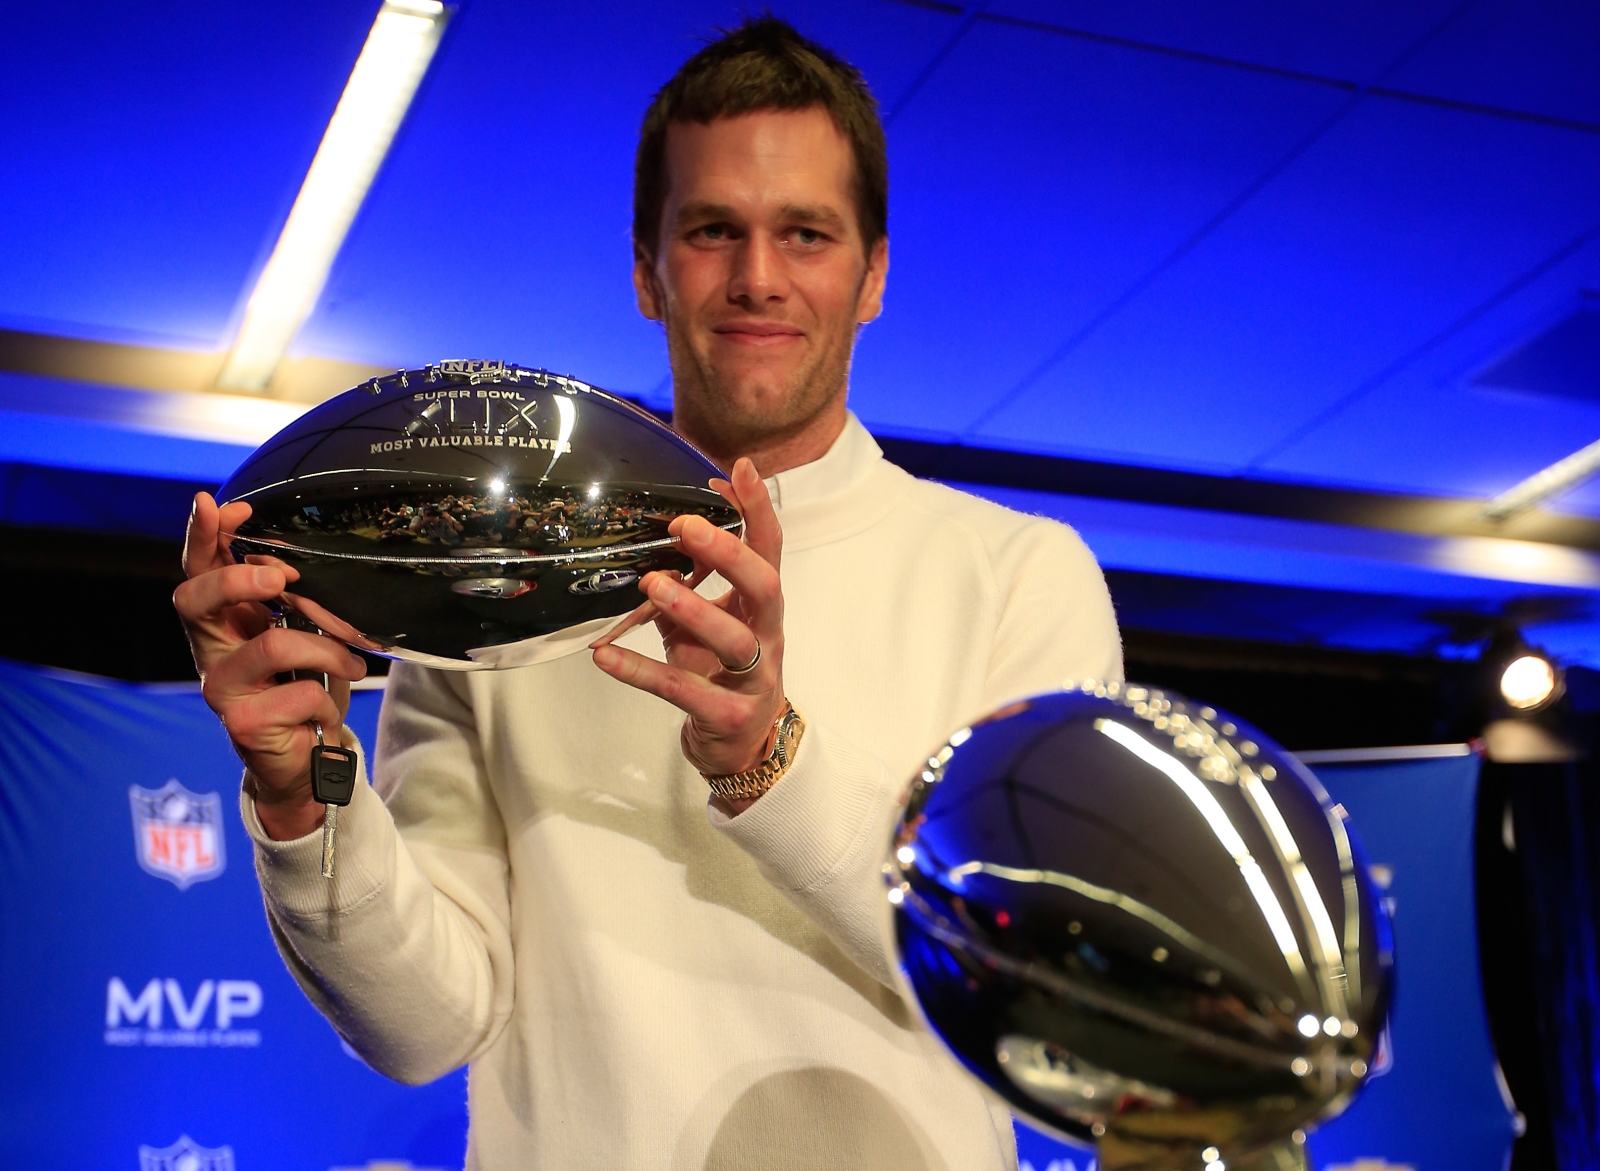 Which NFL players have won the most Super Bowl MVP awards?